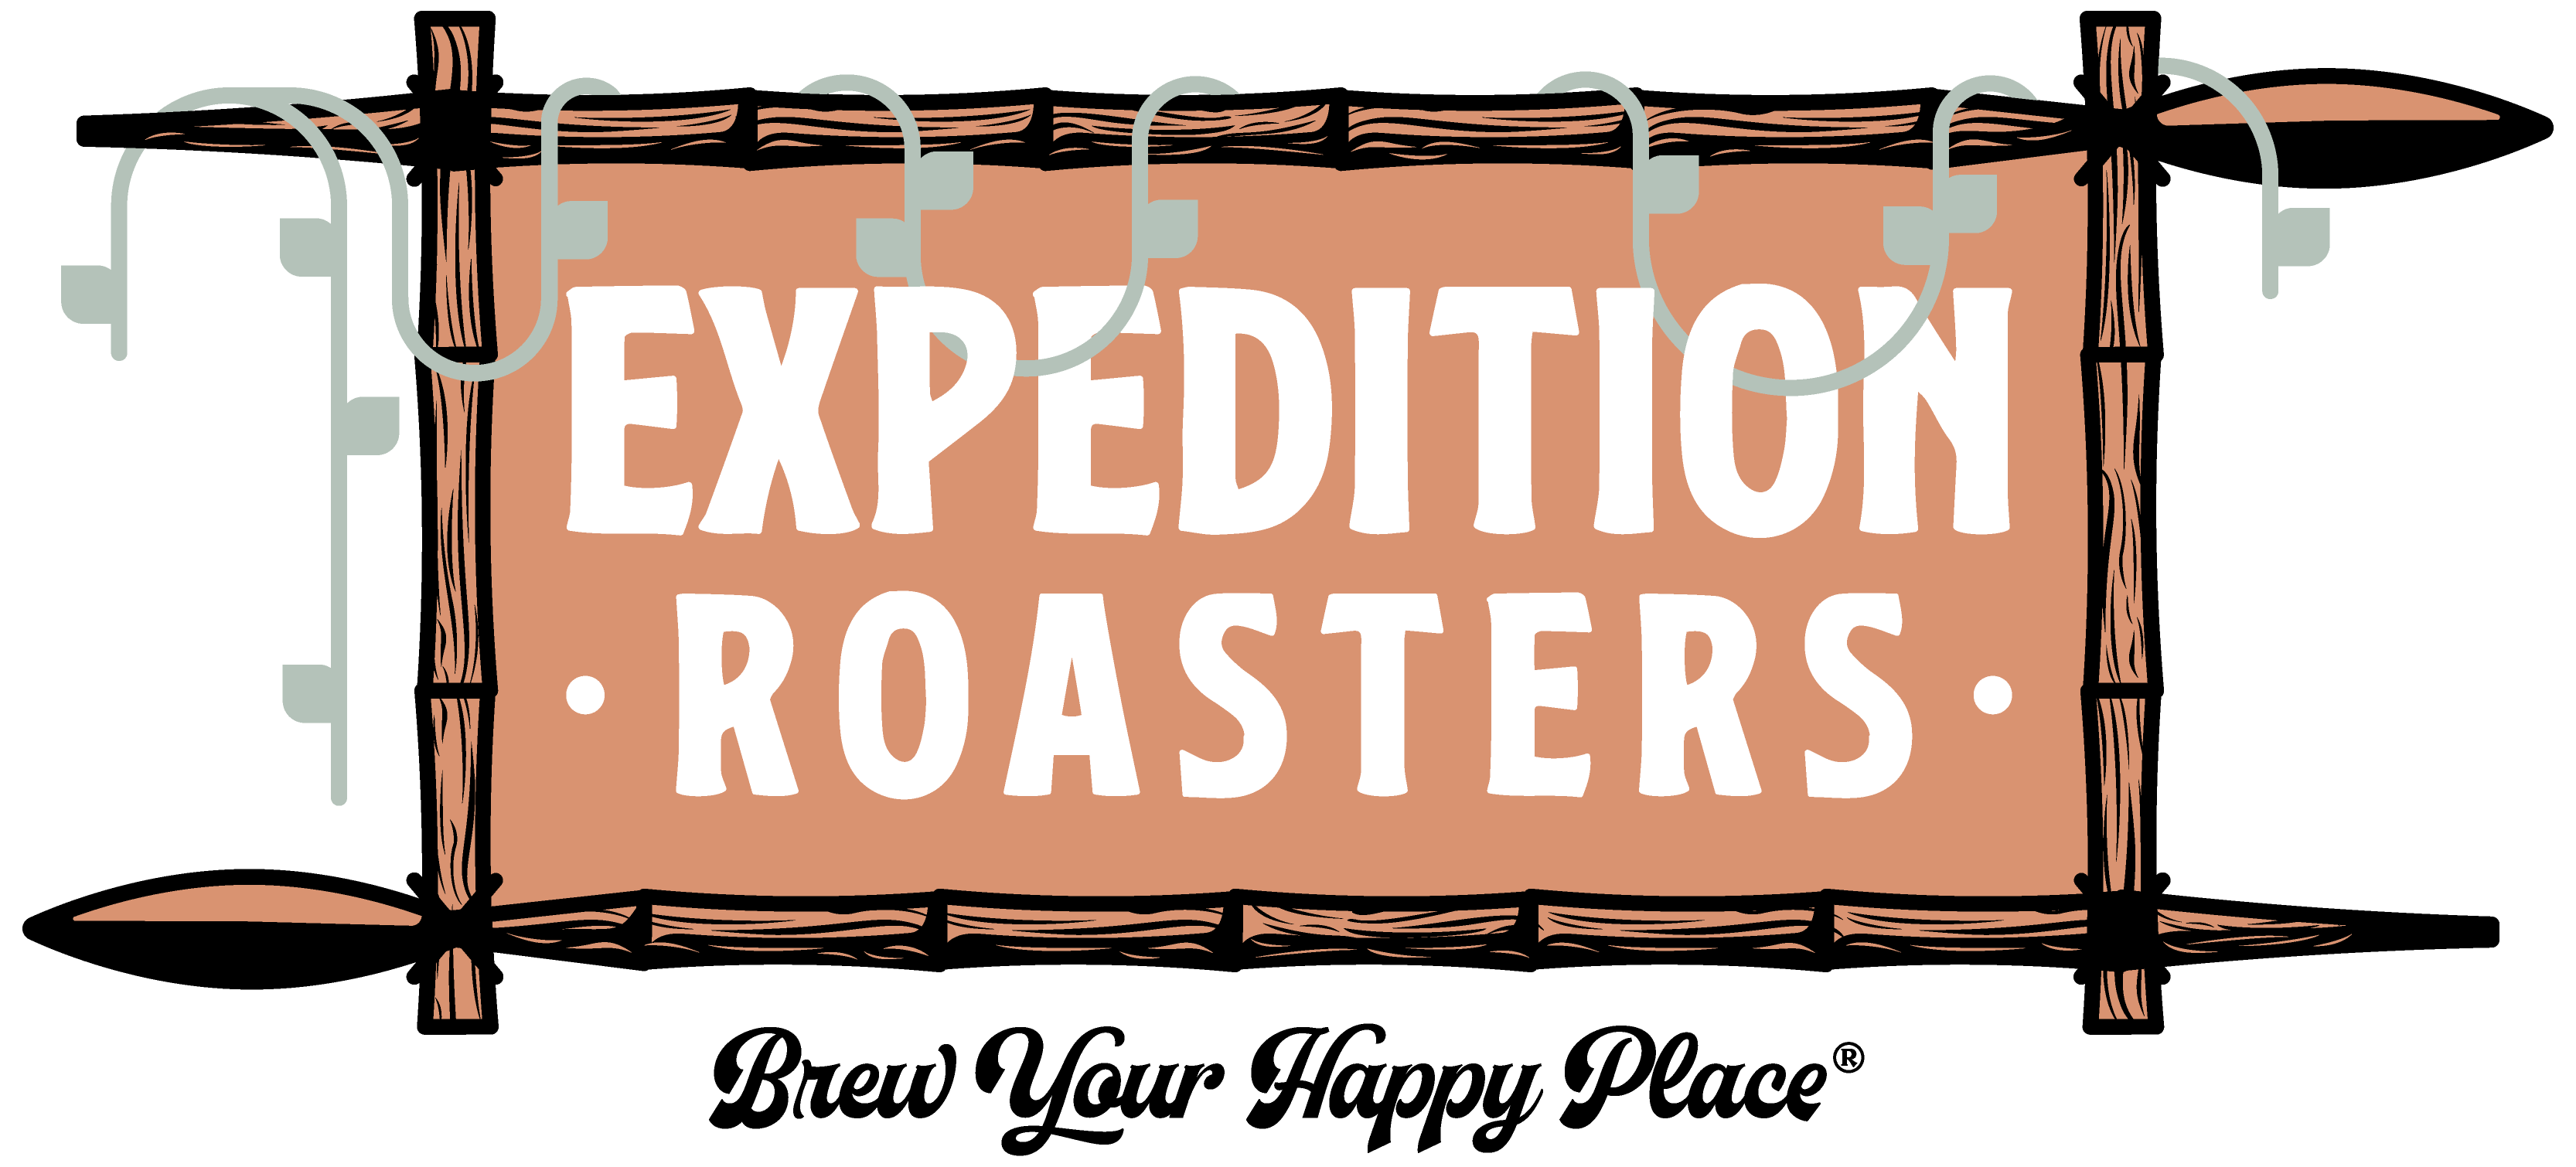 Expedition_Roasters_Colored_-_Transparent_-_Light_Background_Print-01.png